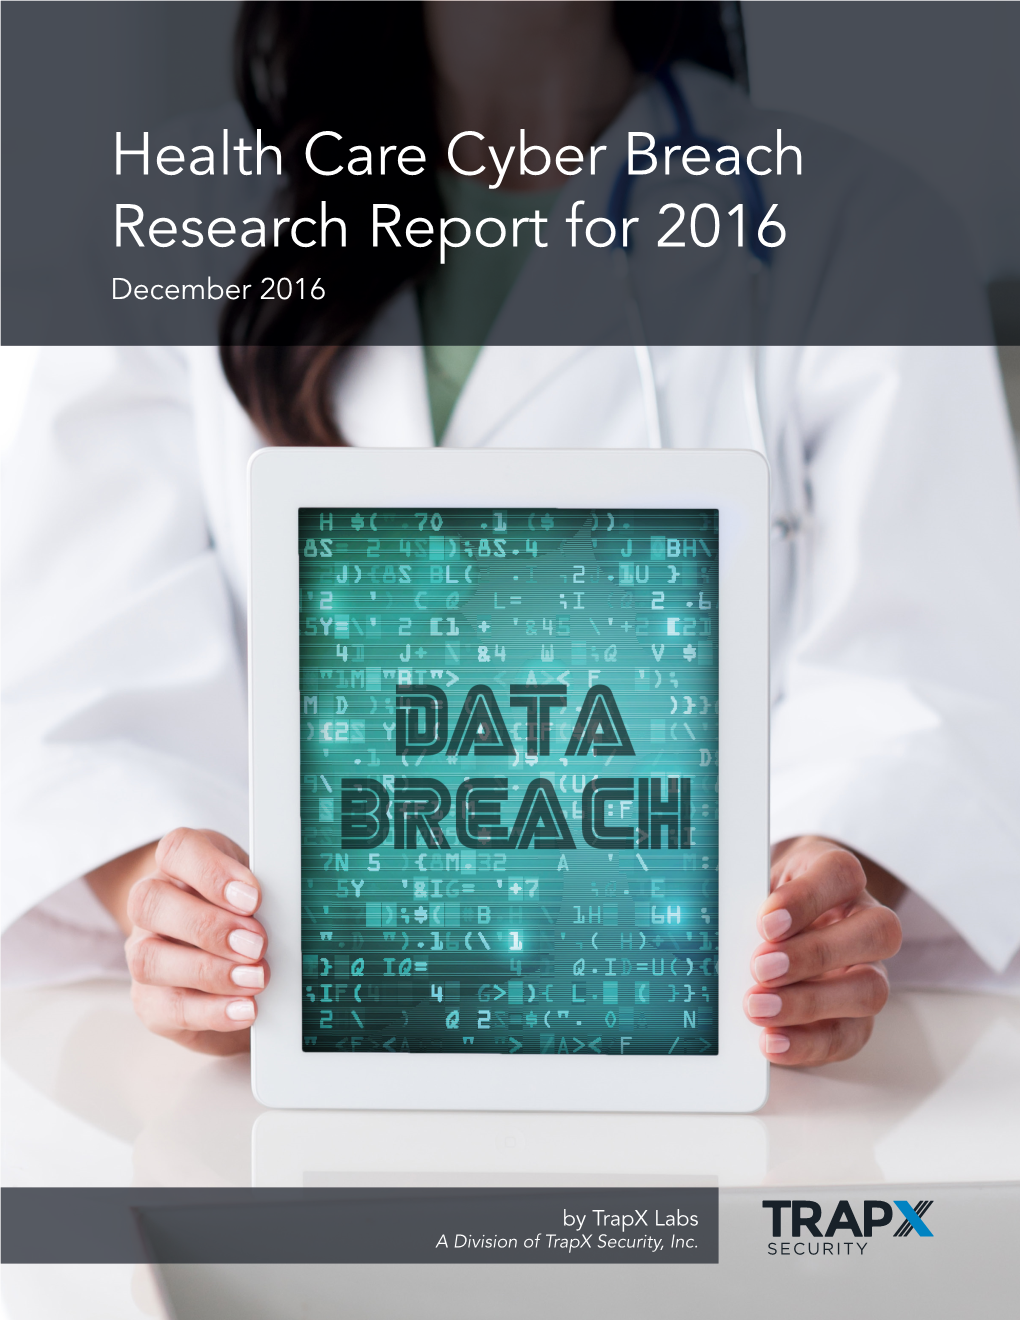 Health Care Cyber Breach Research Report for 2016 December 2016